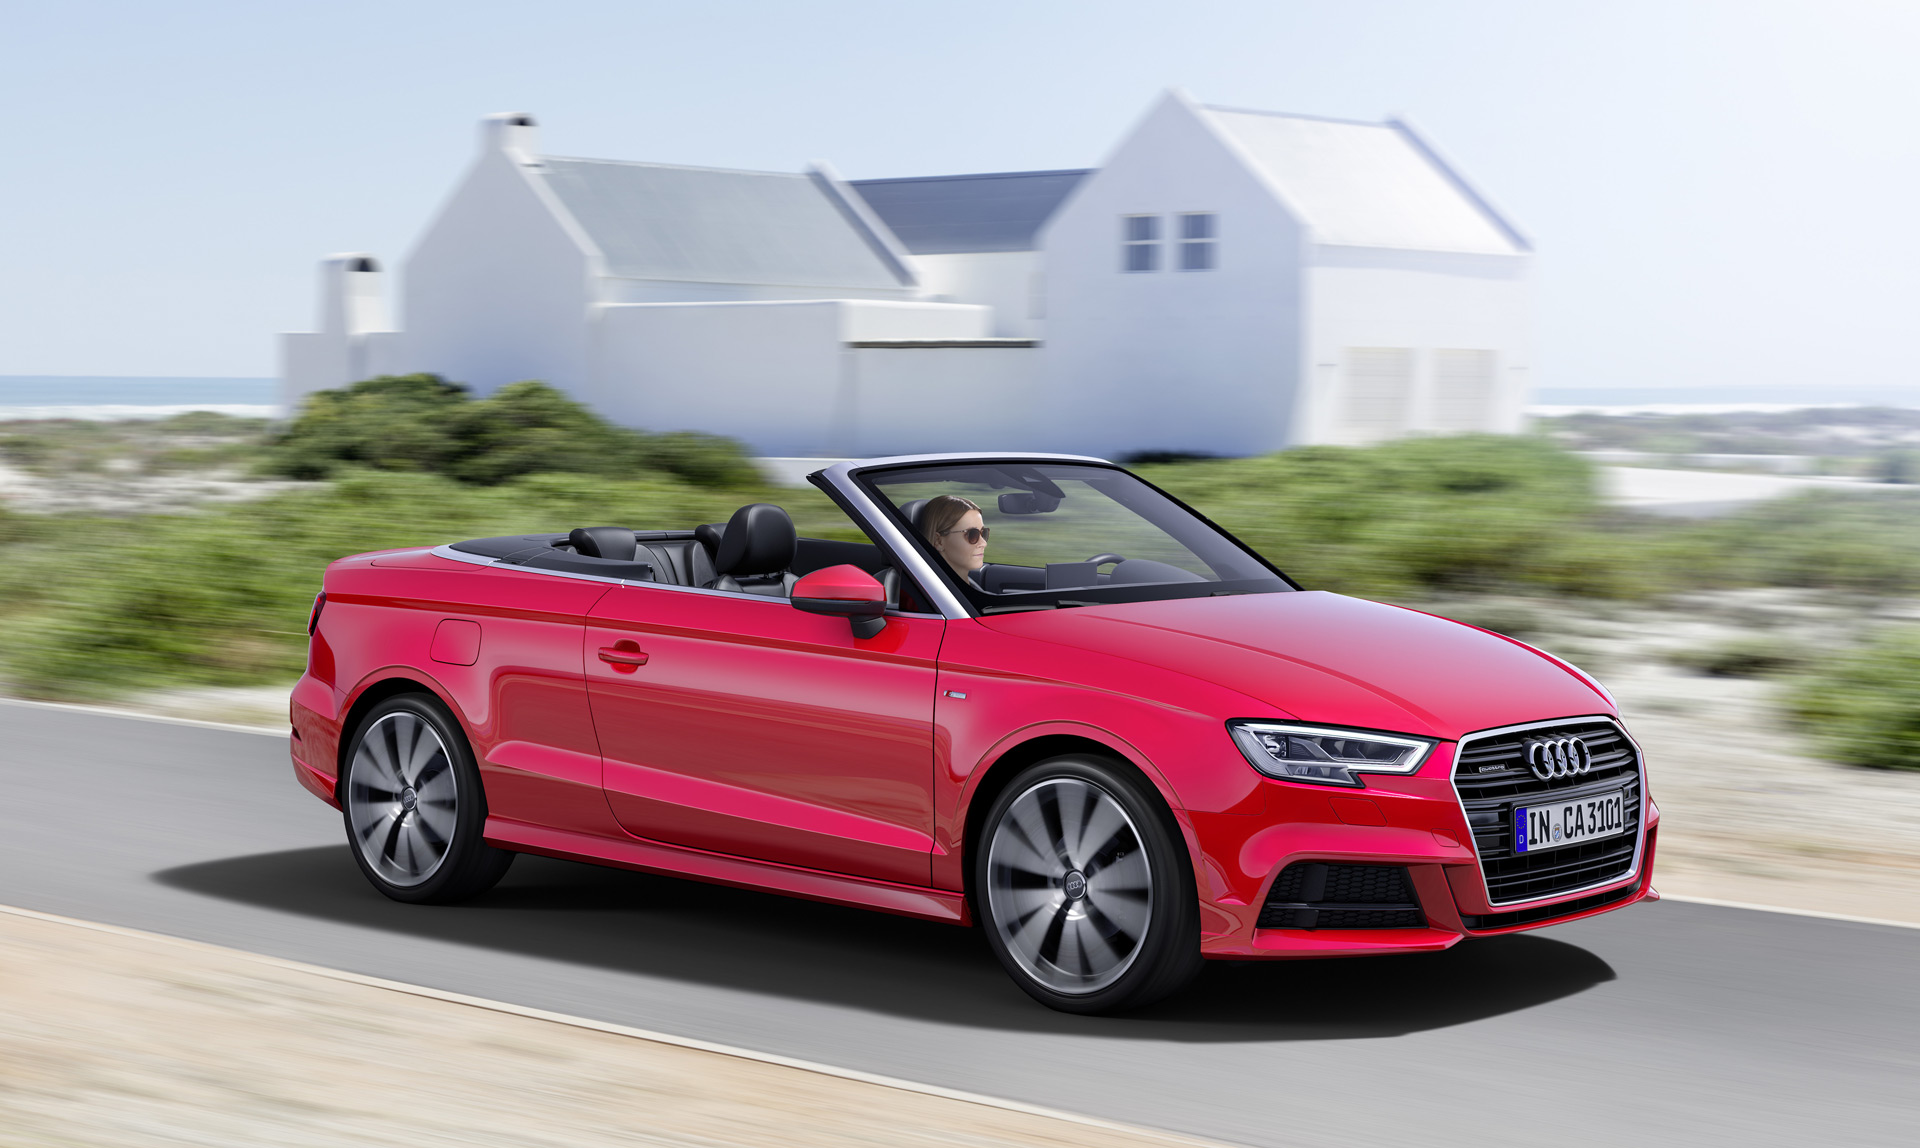 Audi A3 gains Final Edition trim for 2020, loses Cabriolet body style